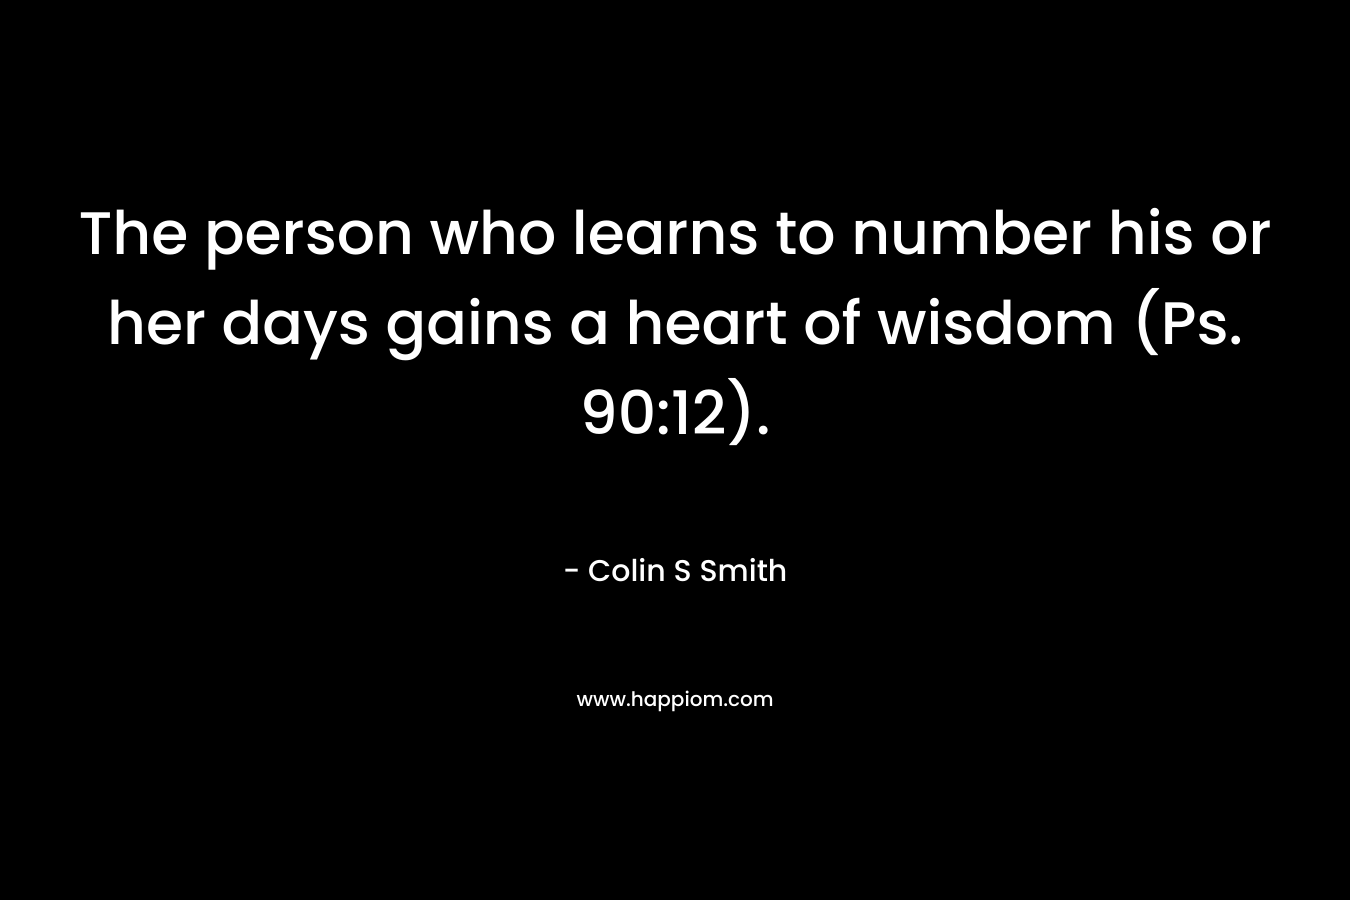 The person who learns to number his or her days gains a heart of wisdom (Ps. 90:12). – Colin S Smith